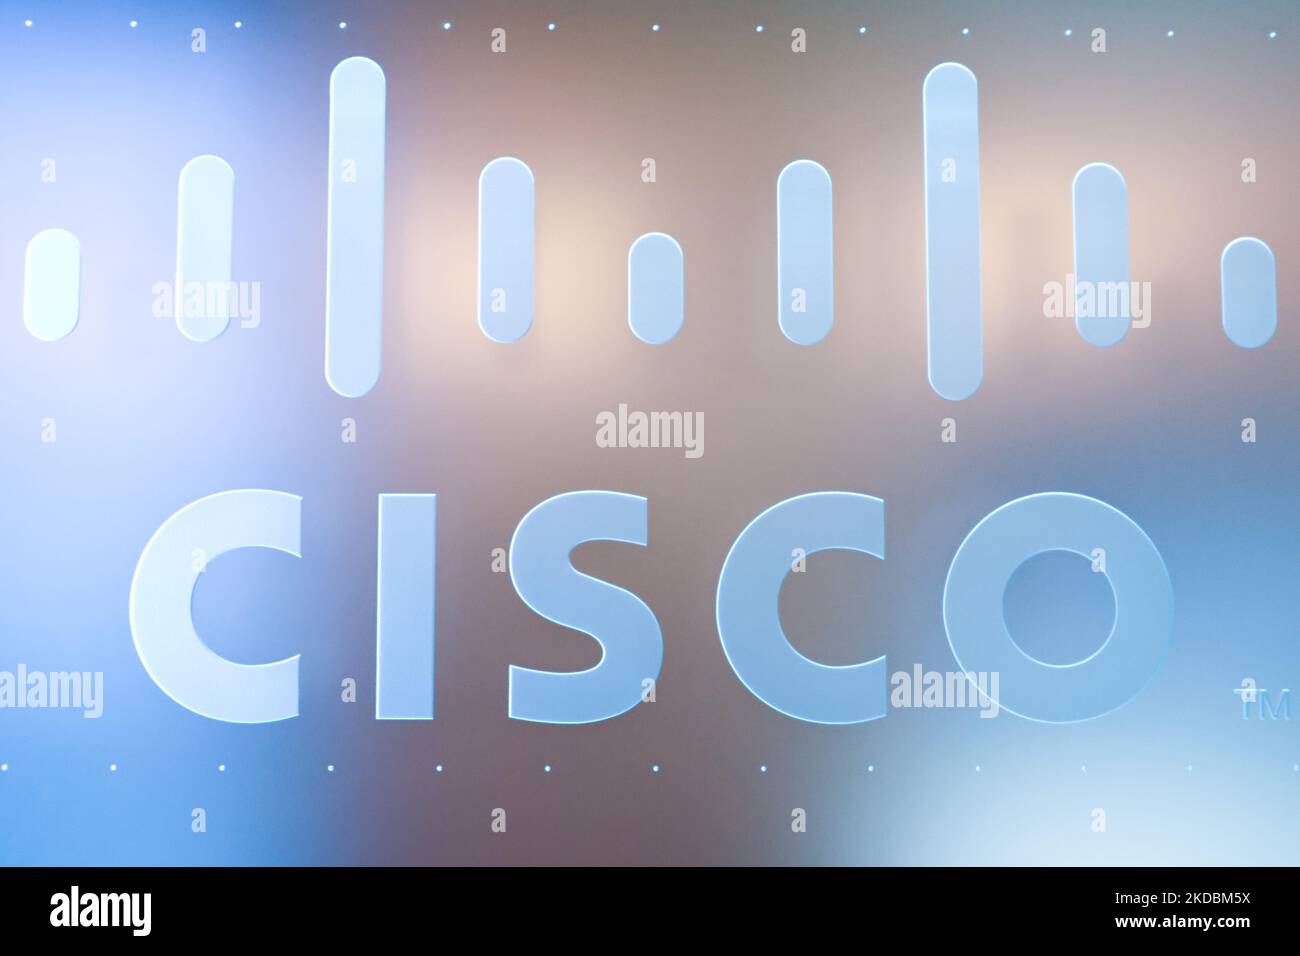 Cisco Systems gives new meaning to the words light switch